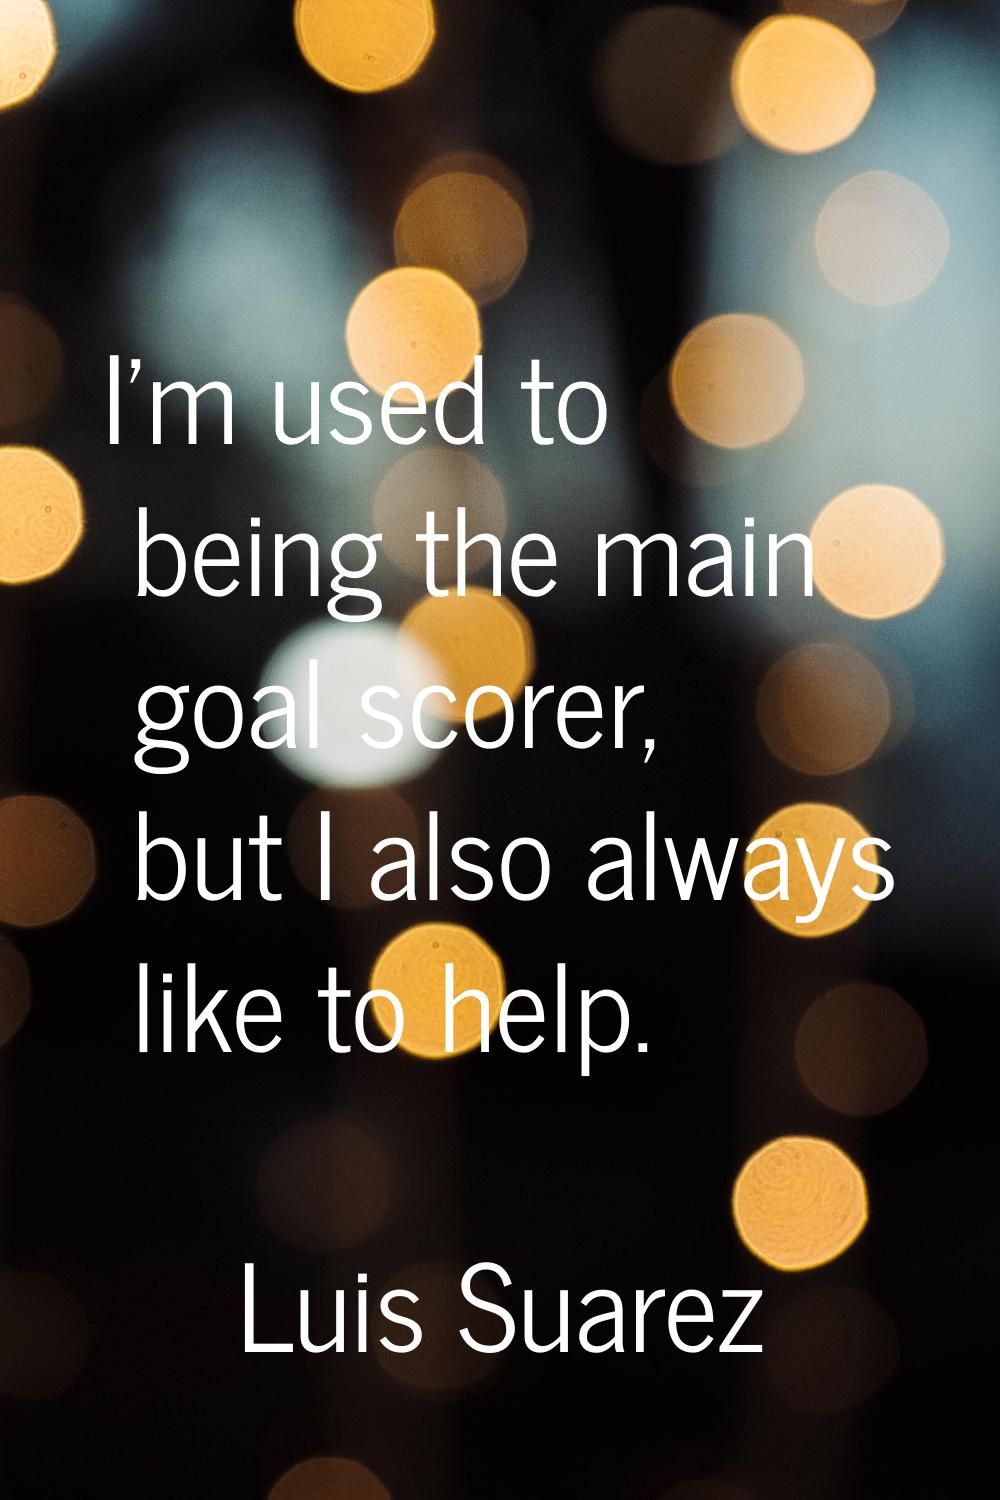 I'm used to being the main goal scorer, but I also always like to help.